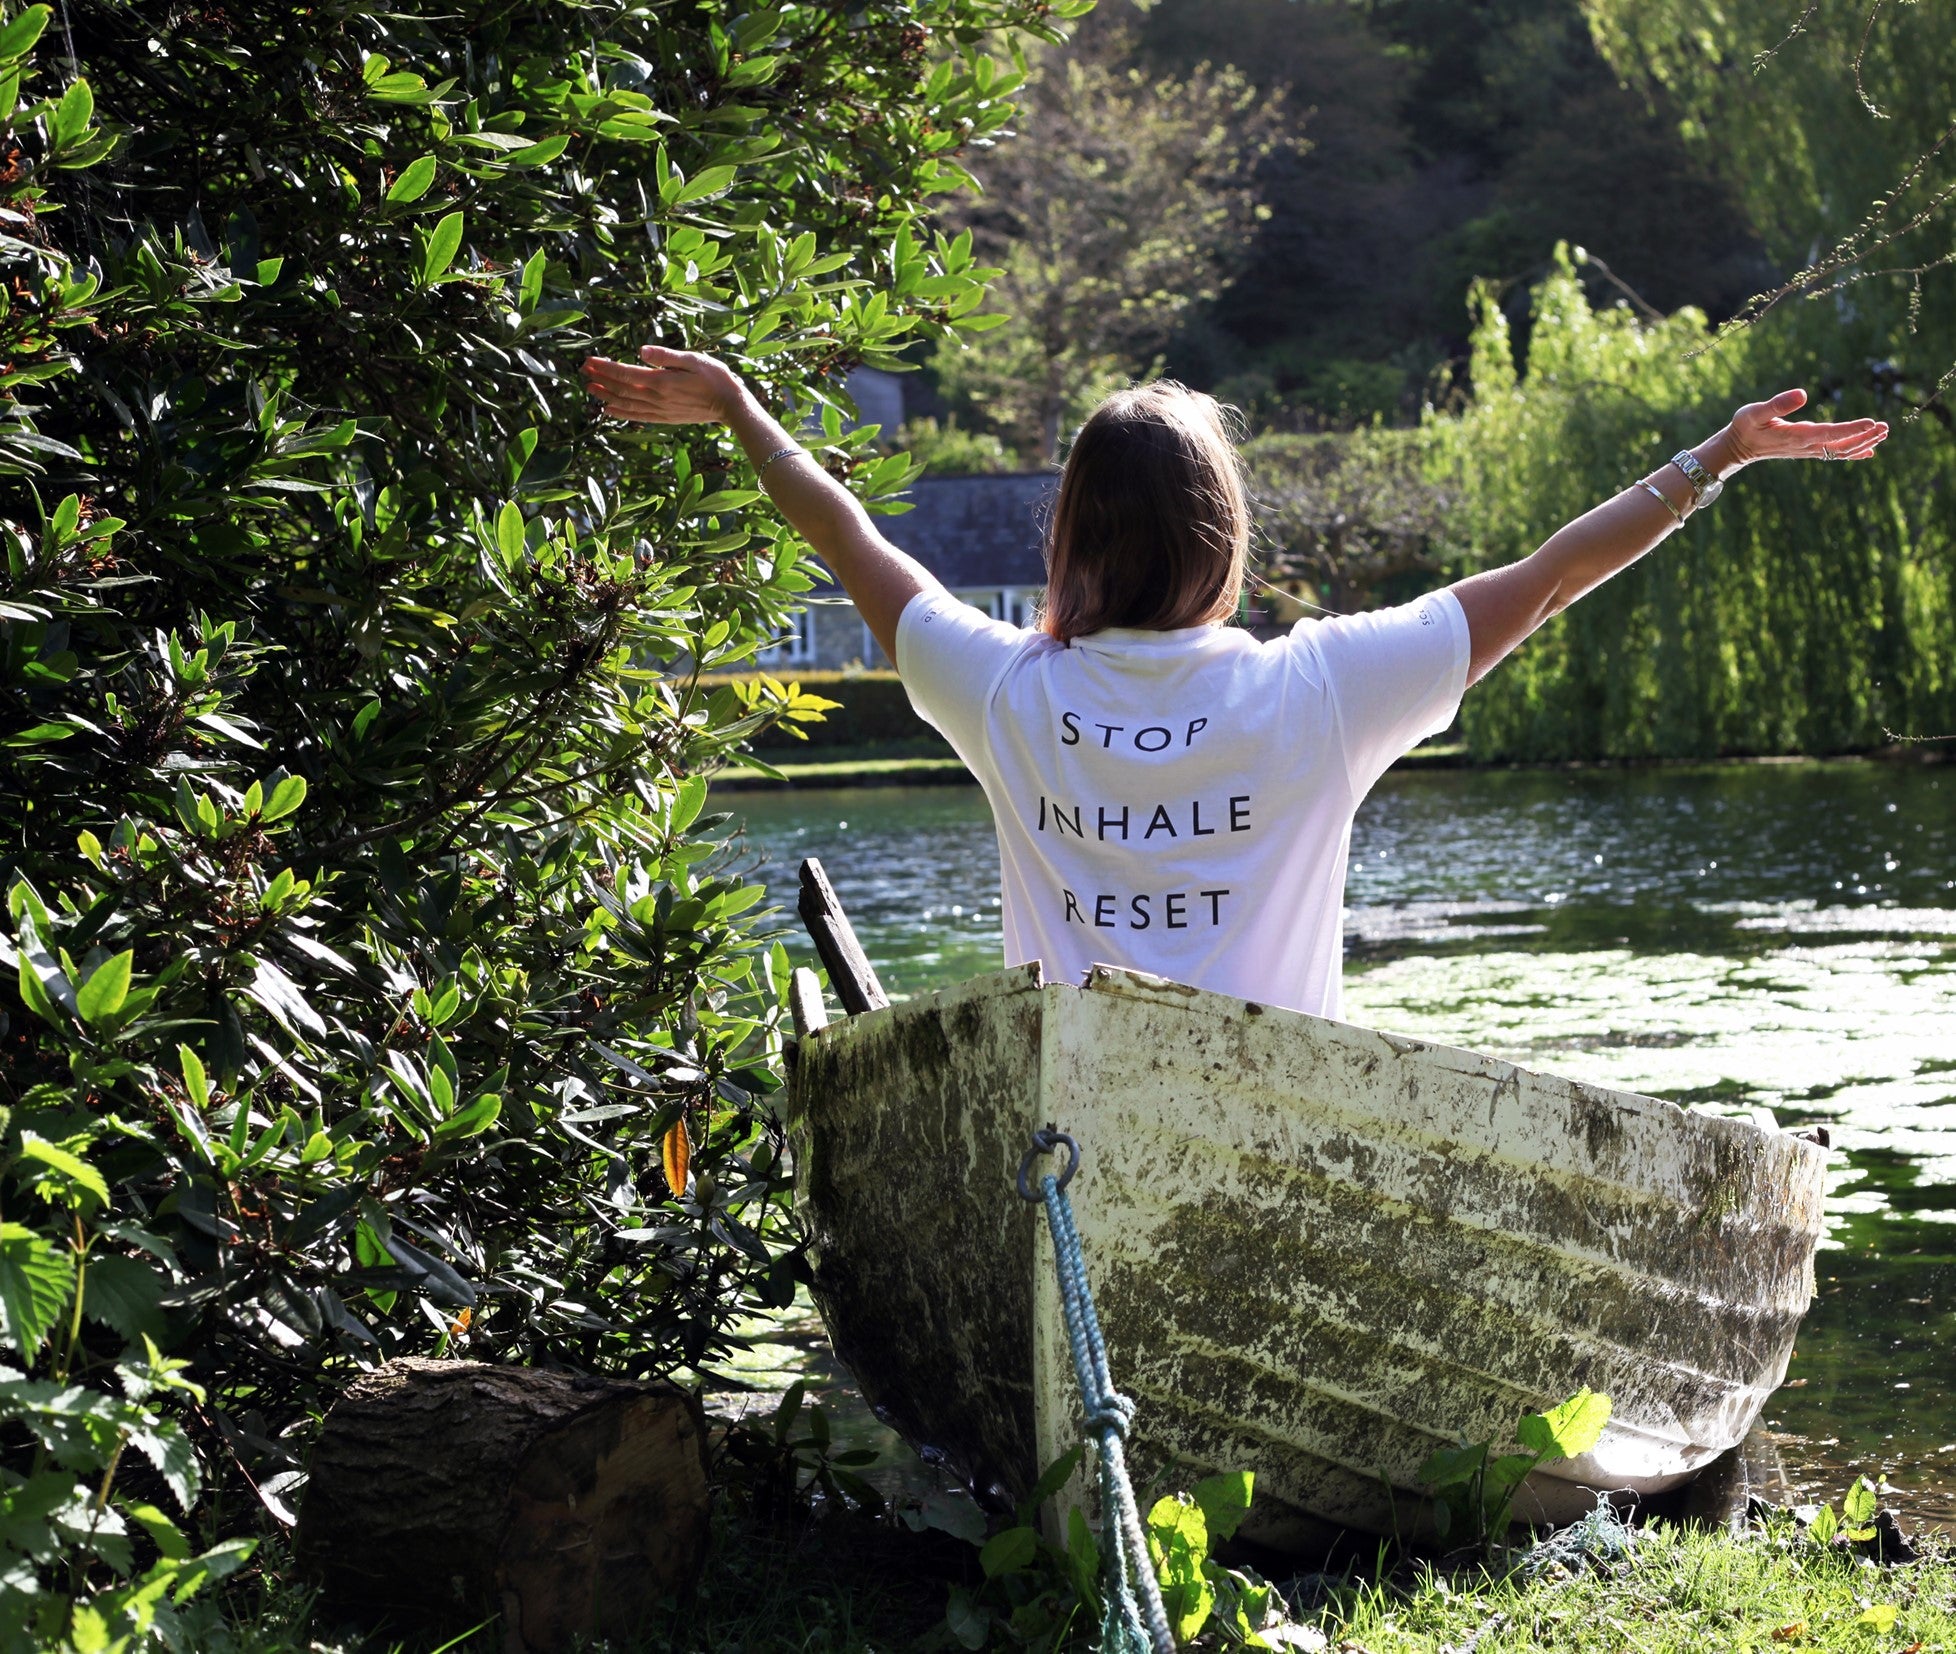 A women sitting in a boat on the river. Her arms out to the side and wearing a t-shirt with Stop, Inhale, Reset written on it.